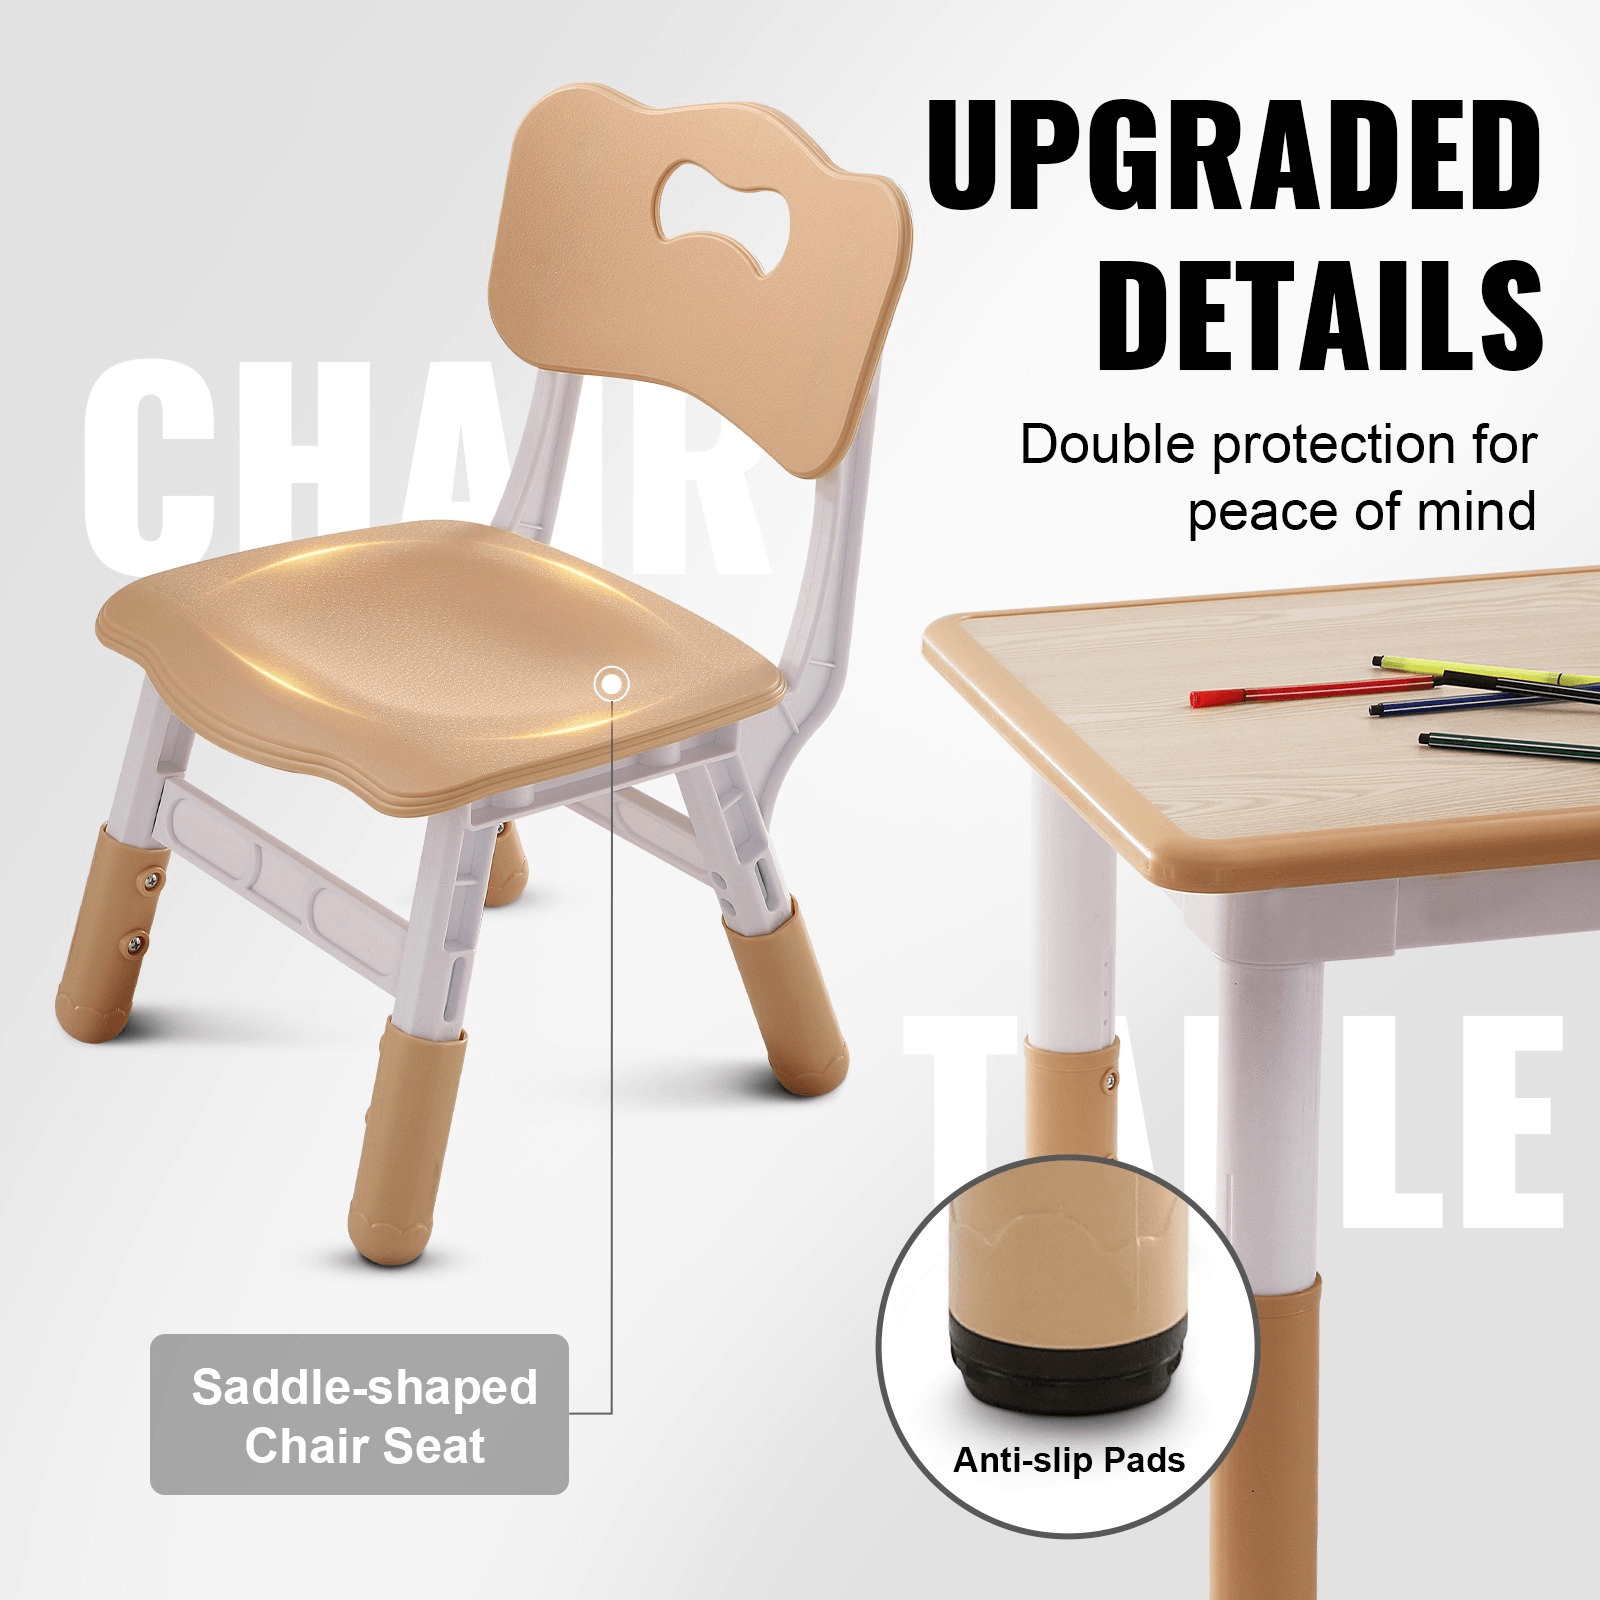 VEVOR Kids Table and 4 Chairs Set, Height Adjustable Toddler Table and Chair Set, Graffiti Desktop, Children Multi-Activity Table for Art, Craft, Reading, Learning - Loomini